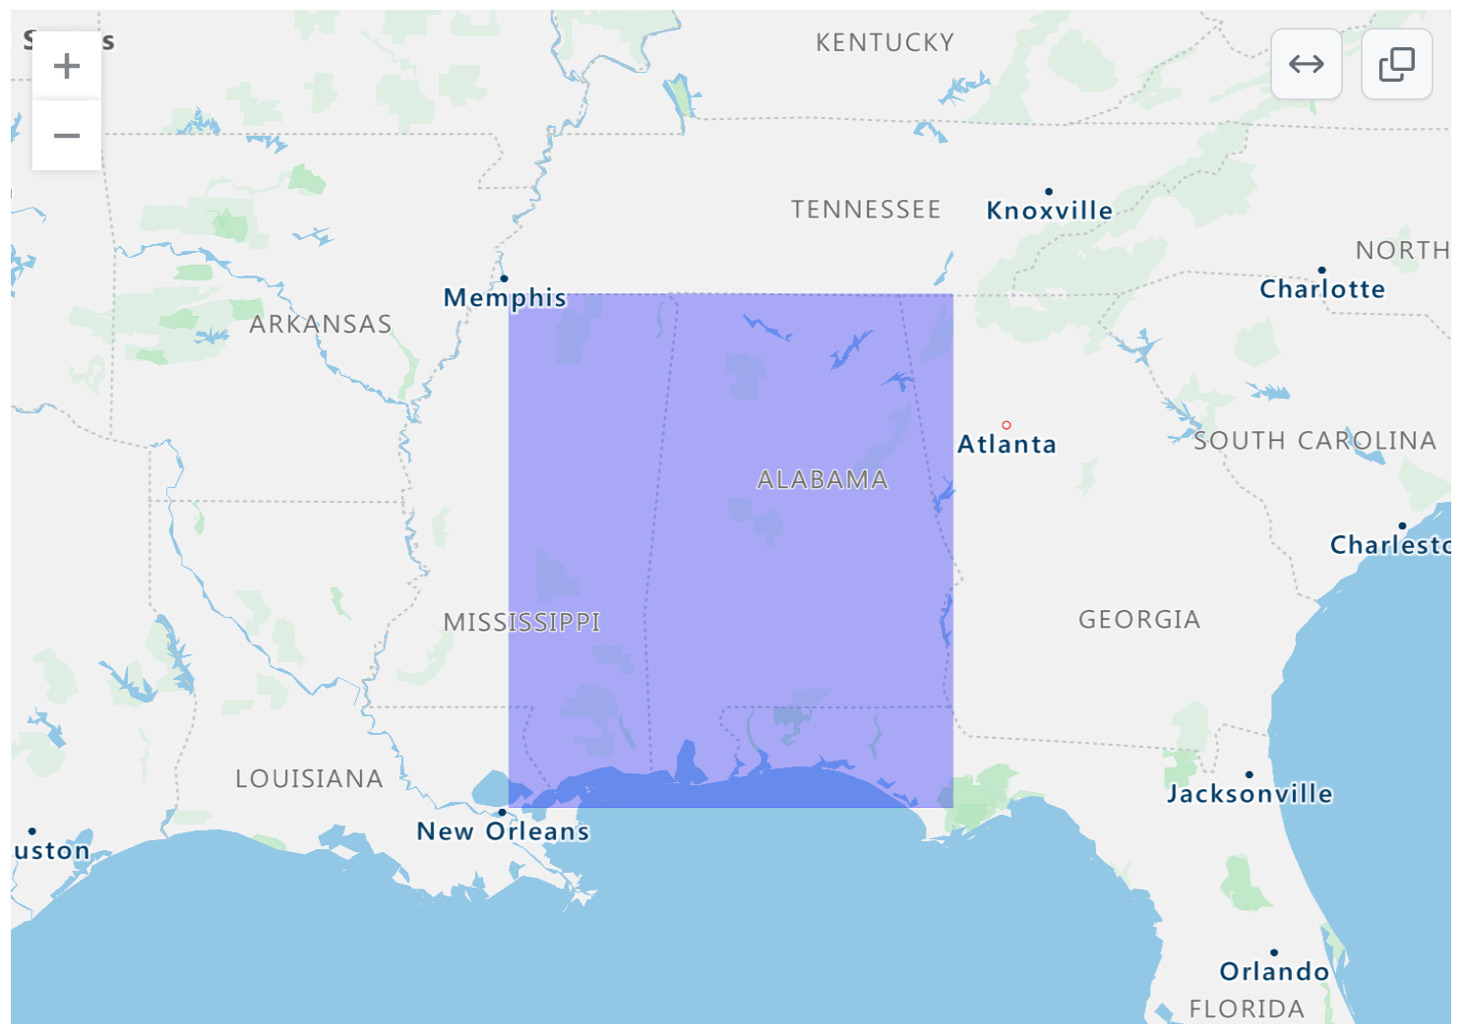 Screenshot of a rendered GeoJSON map of the southeastern United States with a purple rectangular overlay over parts of Alabama and Mississippi.